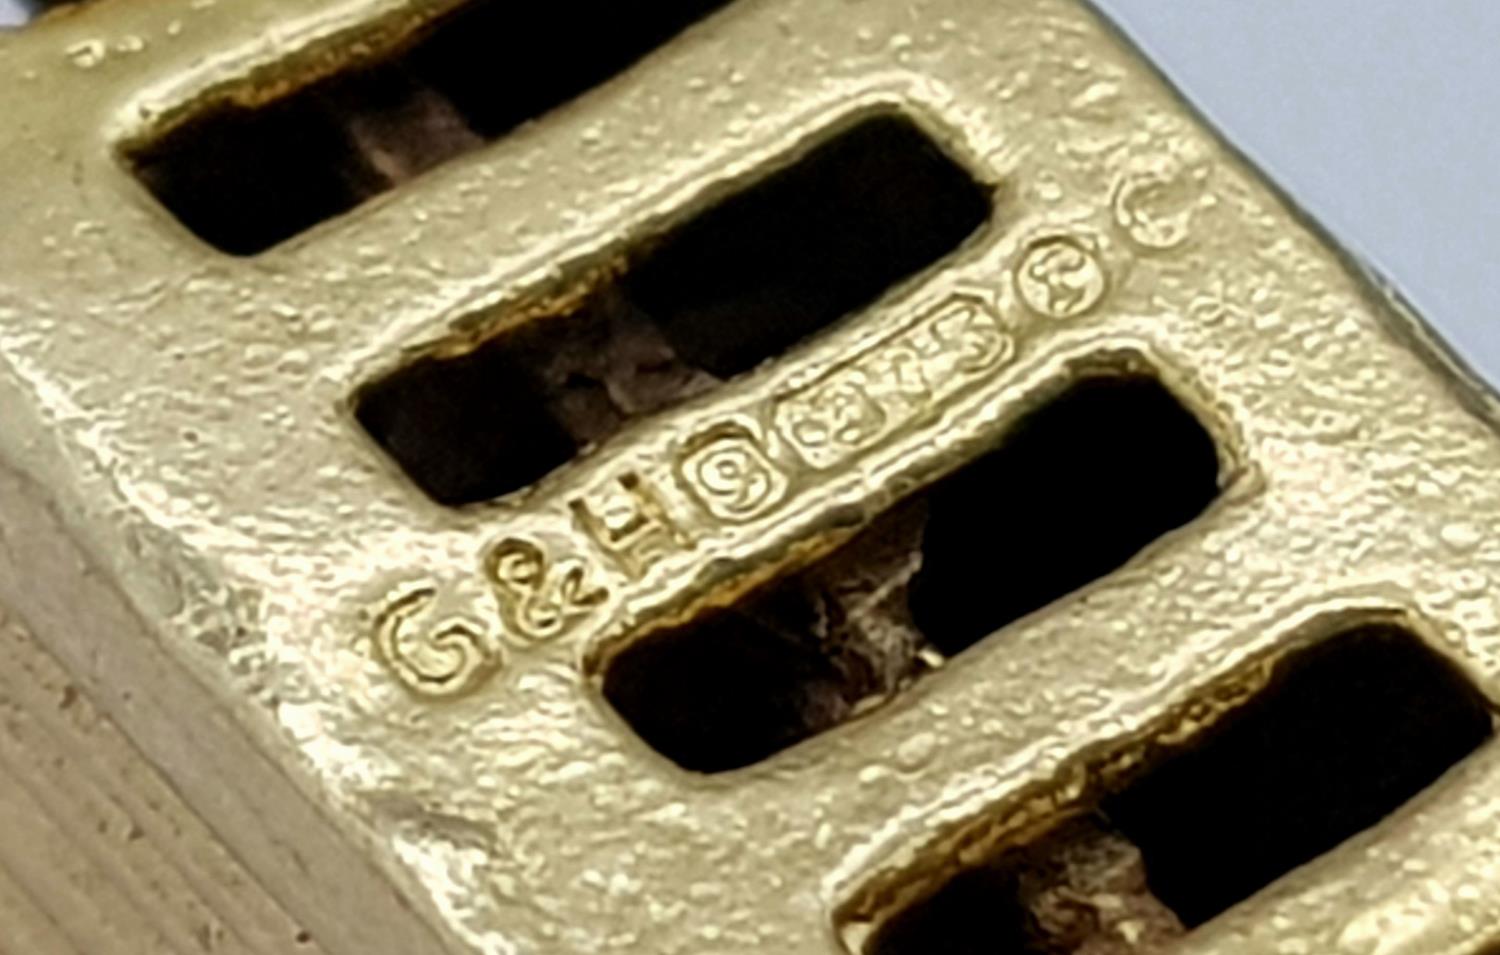 A 9K YELLOW GOLD TOASTER CHARM, WHICH HAS TOAST THAT YOU CAN FLIP OUT VERY CUTE 5.5G , approx 20mm x - Image 4 of 5